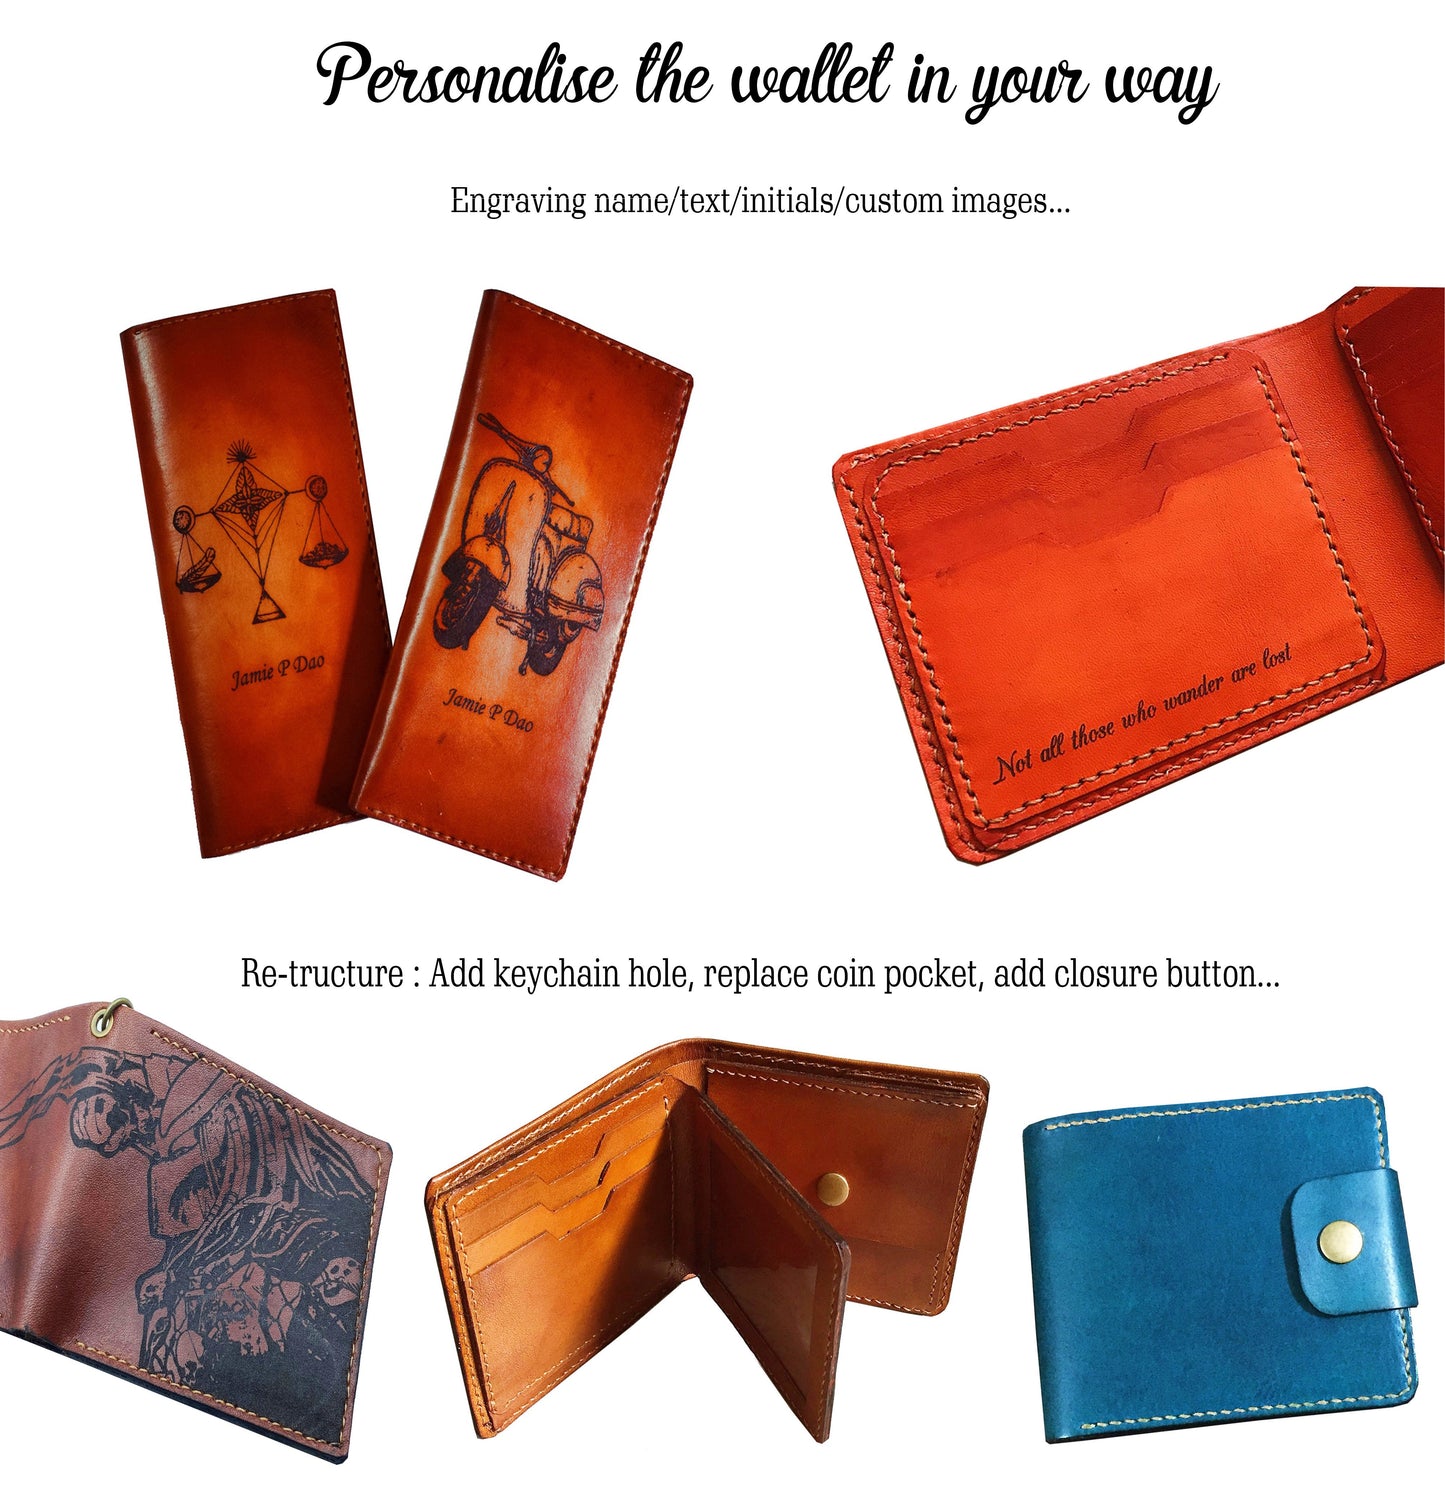 Mayan Corner - Lion animal leather handmade men's wallet, custom gifts for him, father's day birthday gifts, anniversary gift for men